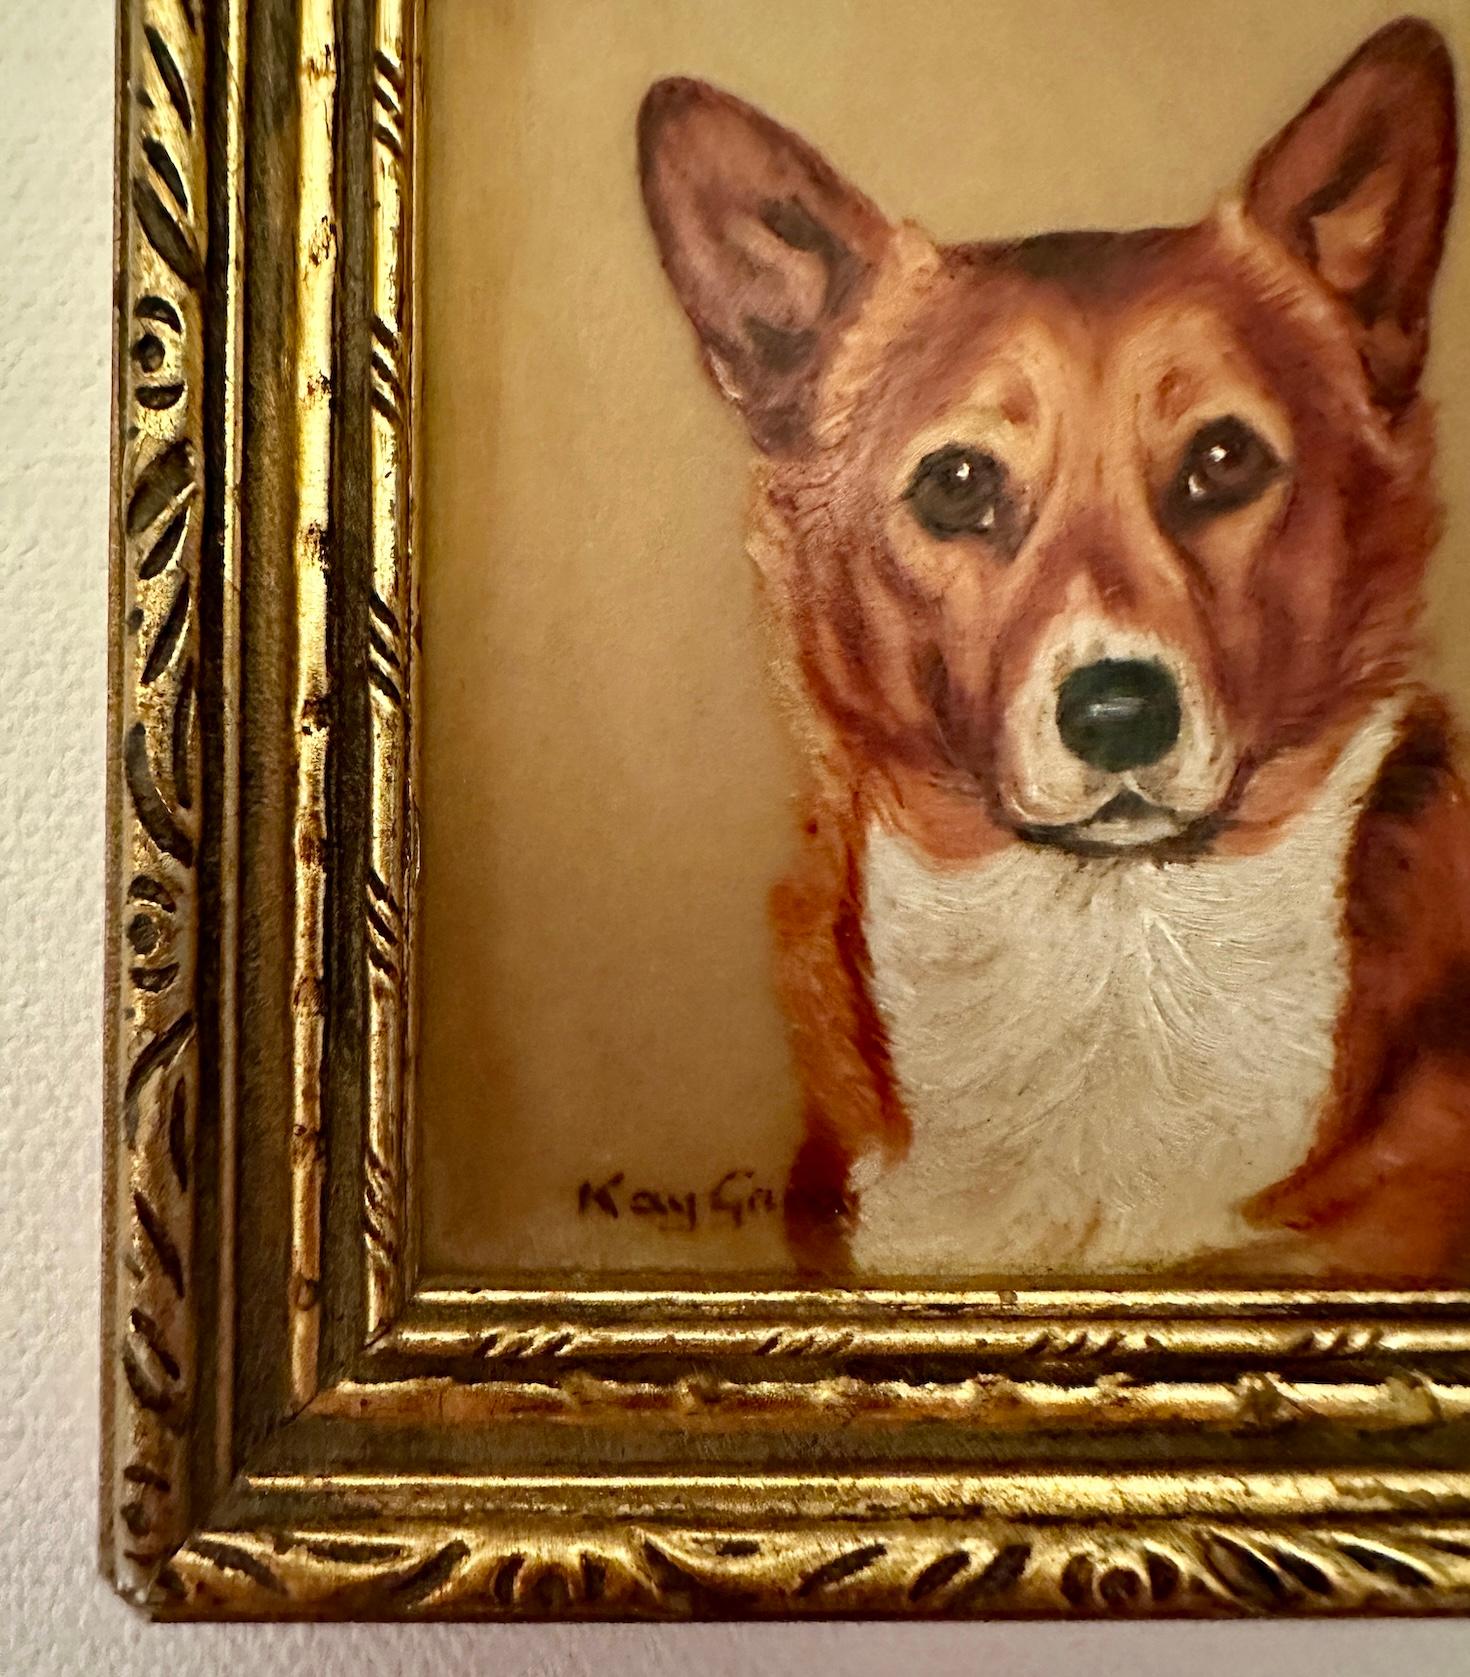 English mid century oil painting Portrait of a cute Corgi.

Paintings of this breed are very rare and very collected.

Kate Gray was a British animal portrait painter during the last half of the 20th century. She also painted flower subjects. 

Her